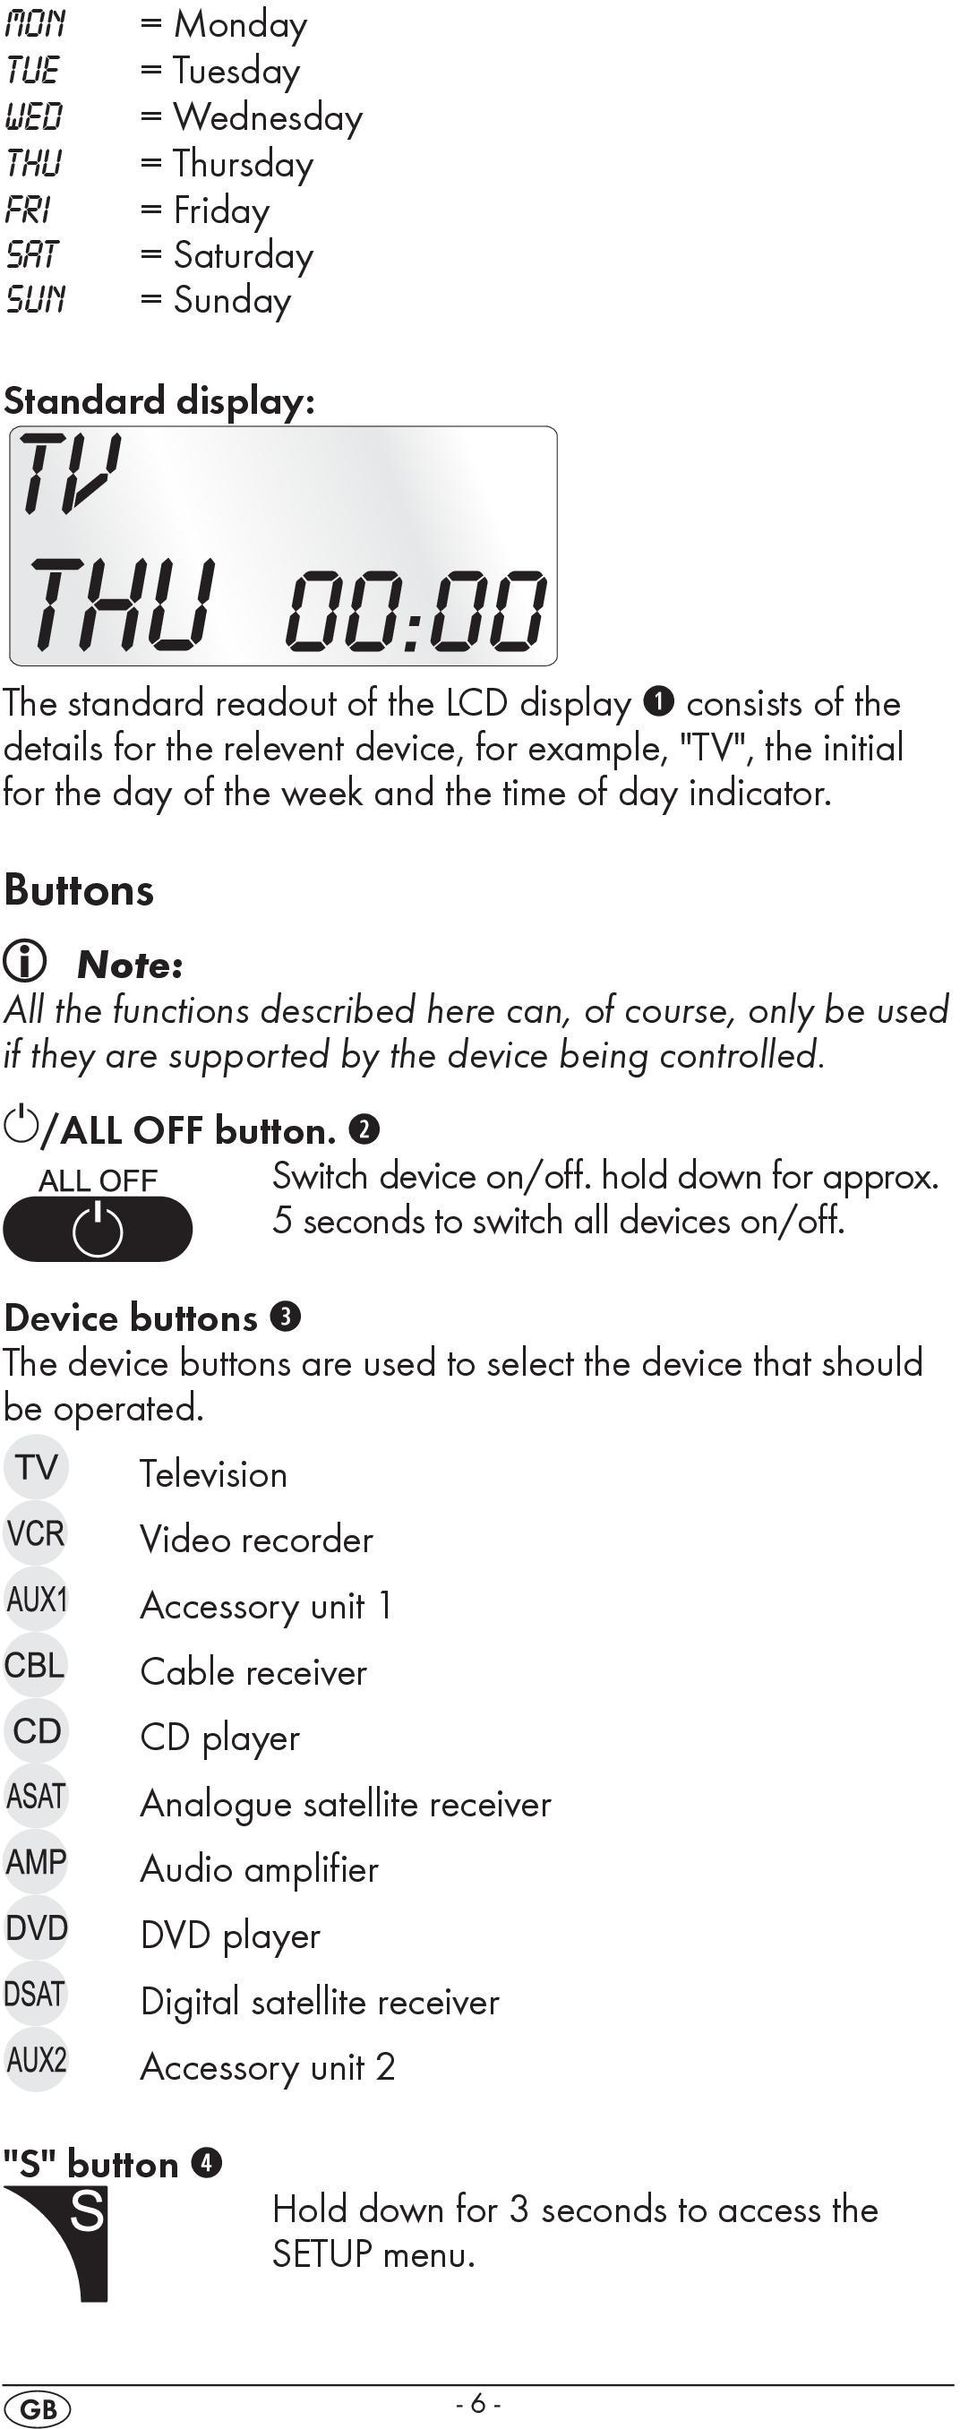 Buttons Note: All the functions described here can, of course, only be used if they are supported by the device being controlled. /ALL OFF button. w Switch device on/off. hold down for approx.